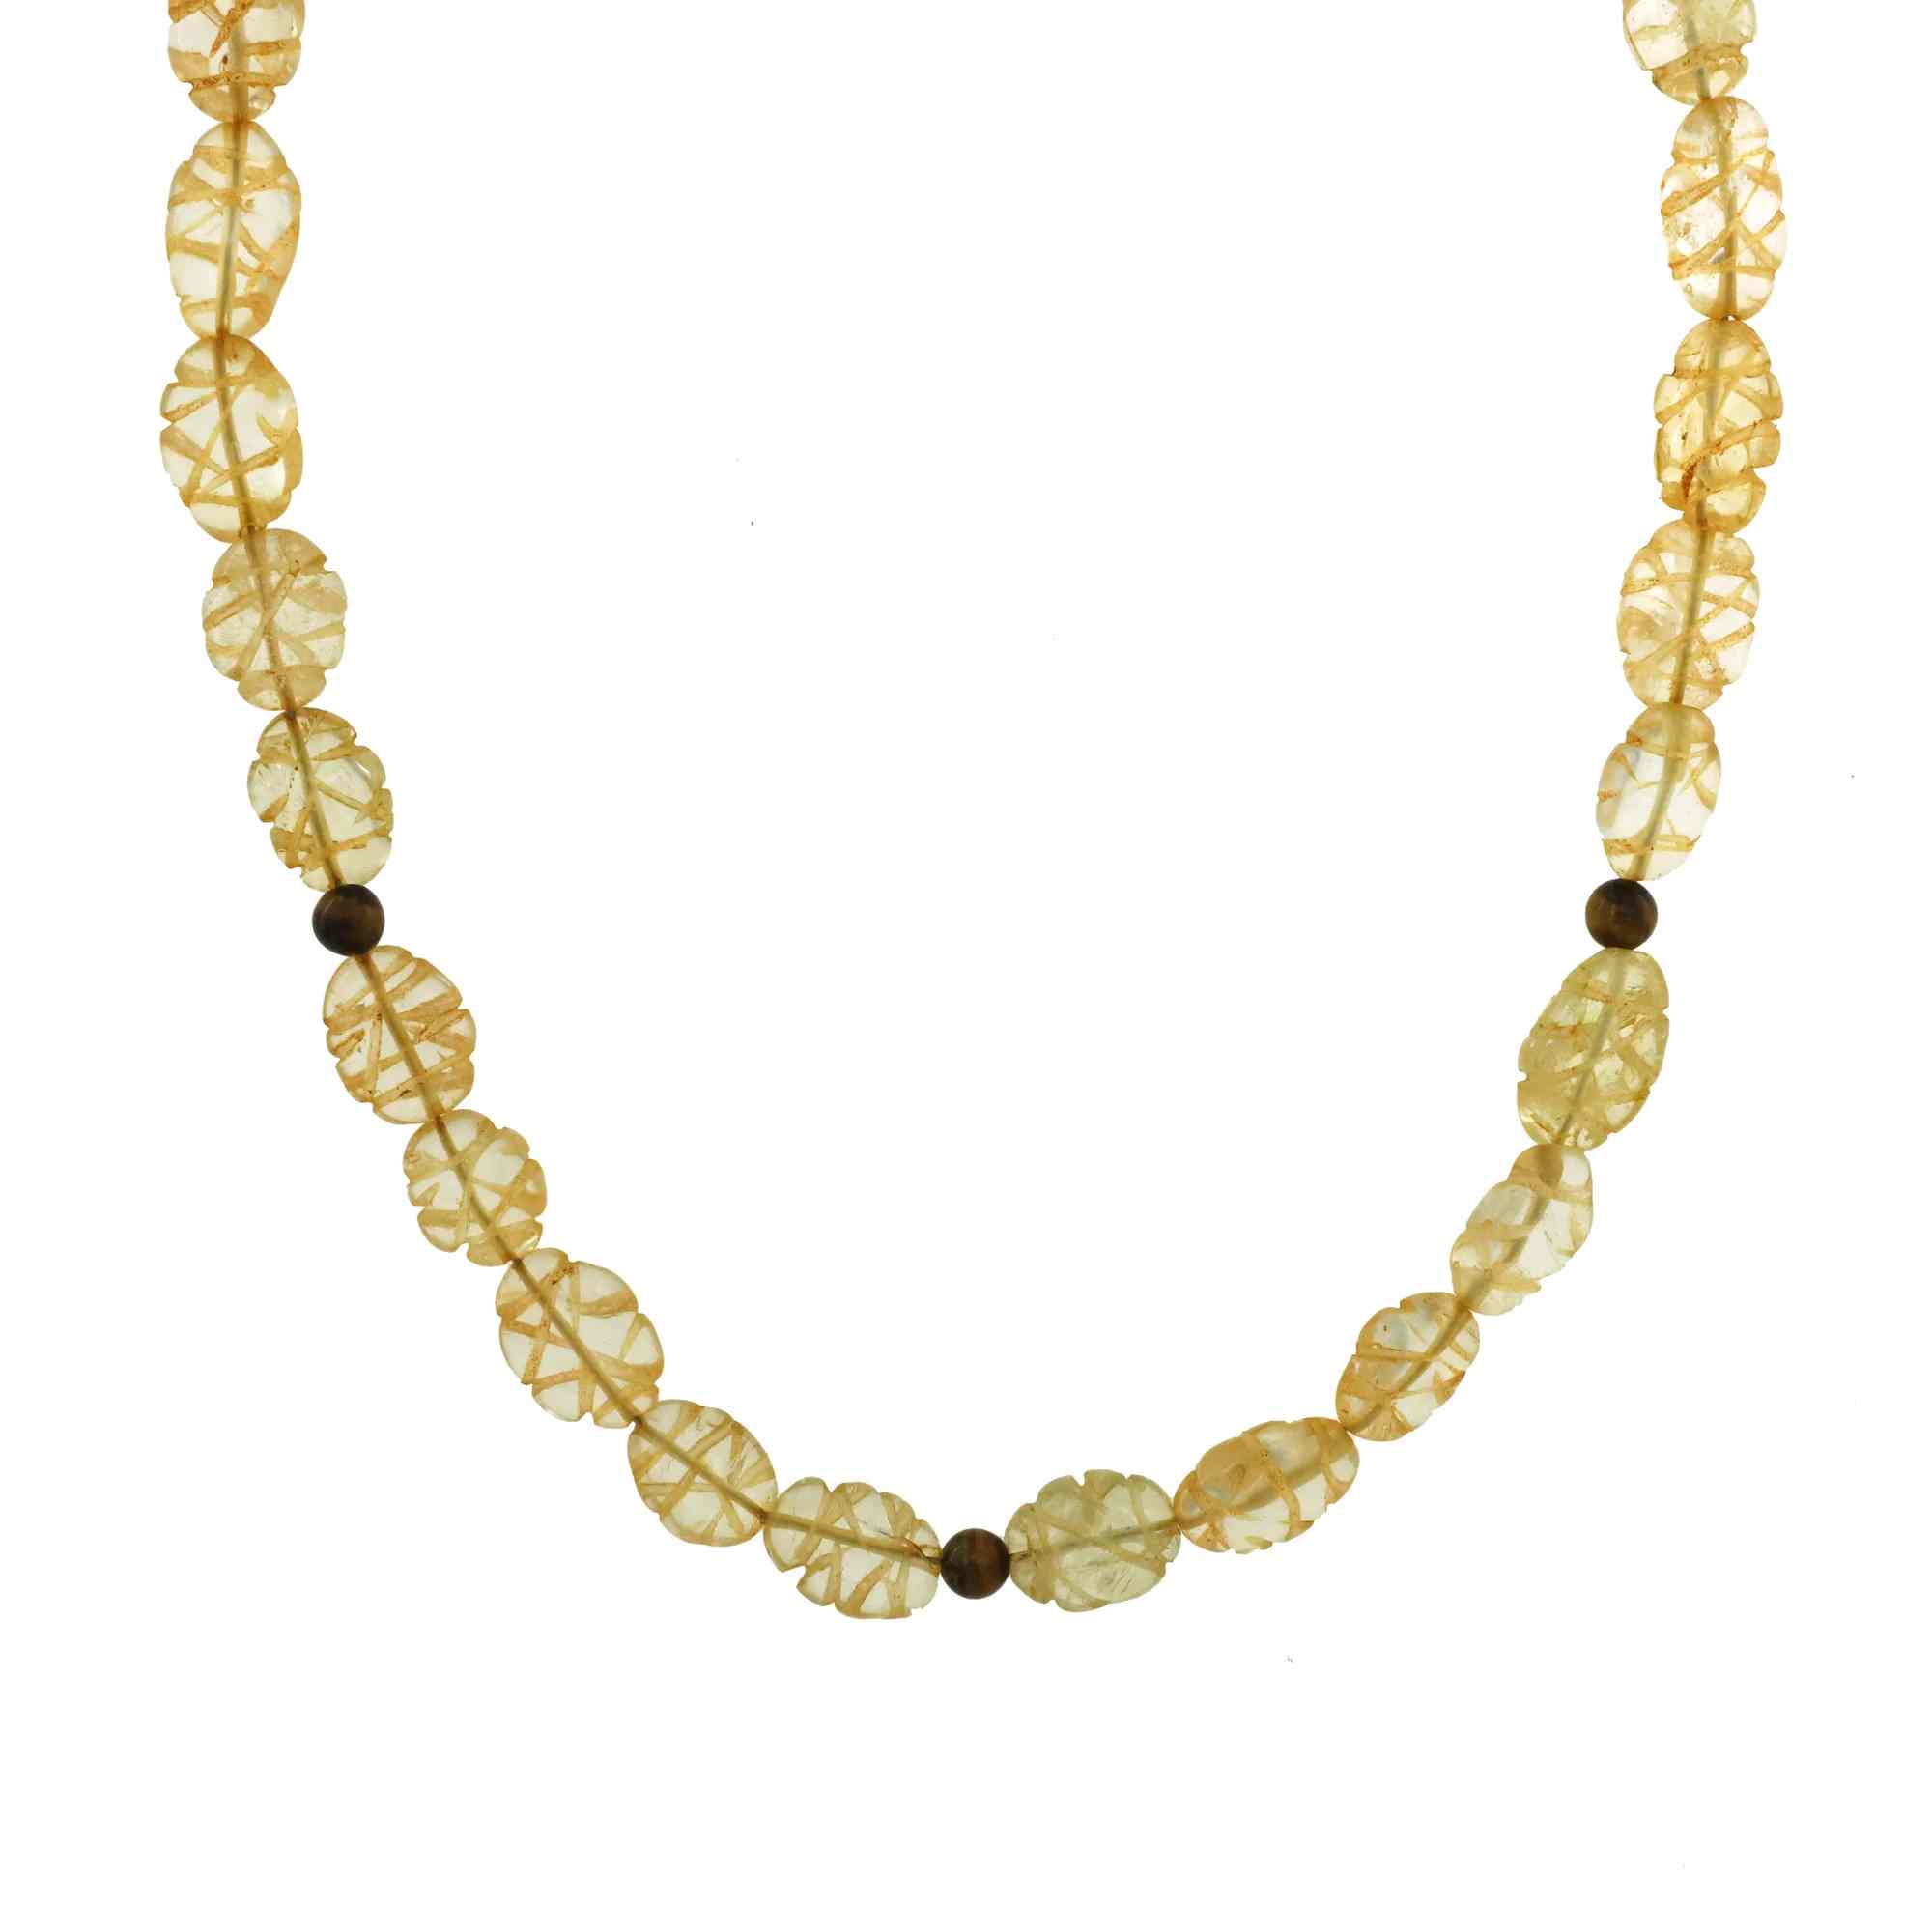 CO.NK.120 Necklace – 18K Gold Plated